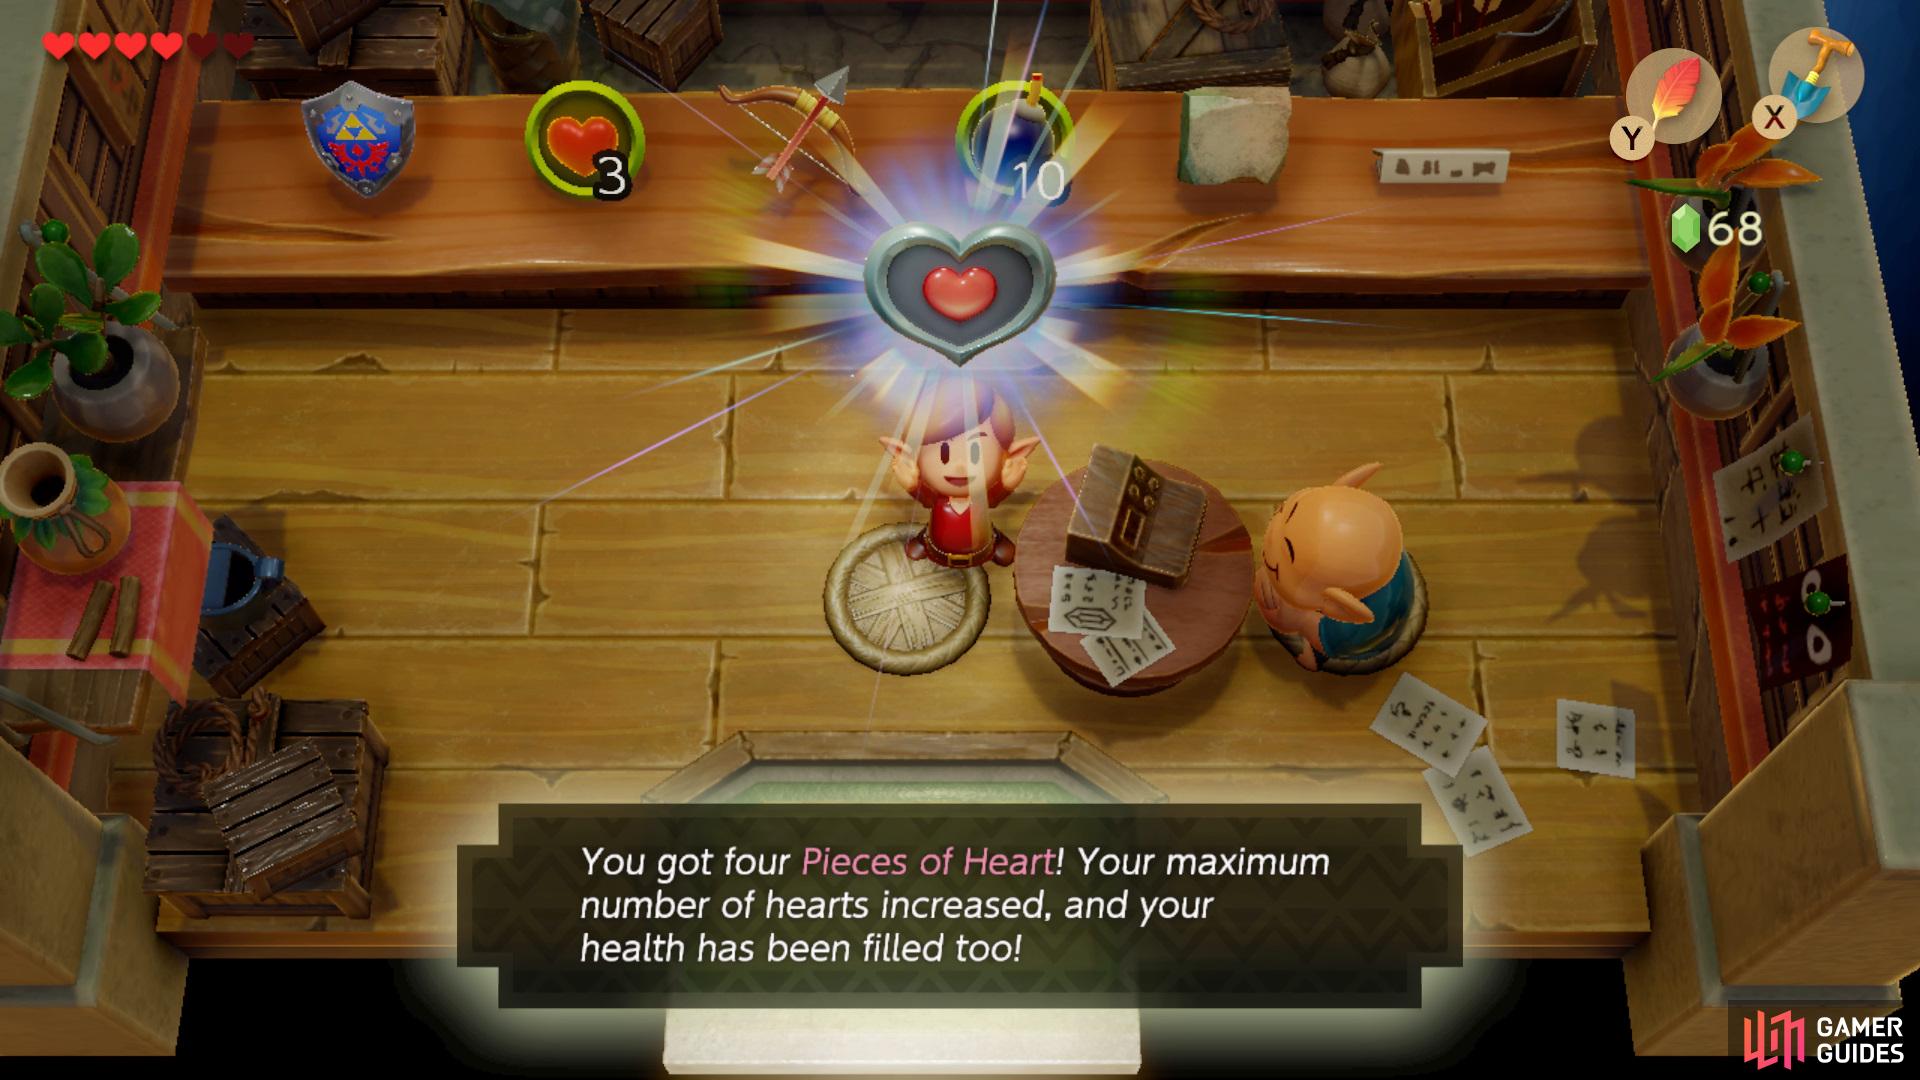 Head into the store in Mabe Village and purchase a Piece of Heart for 200 Rupees.